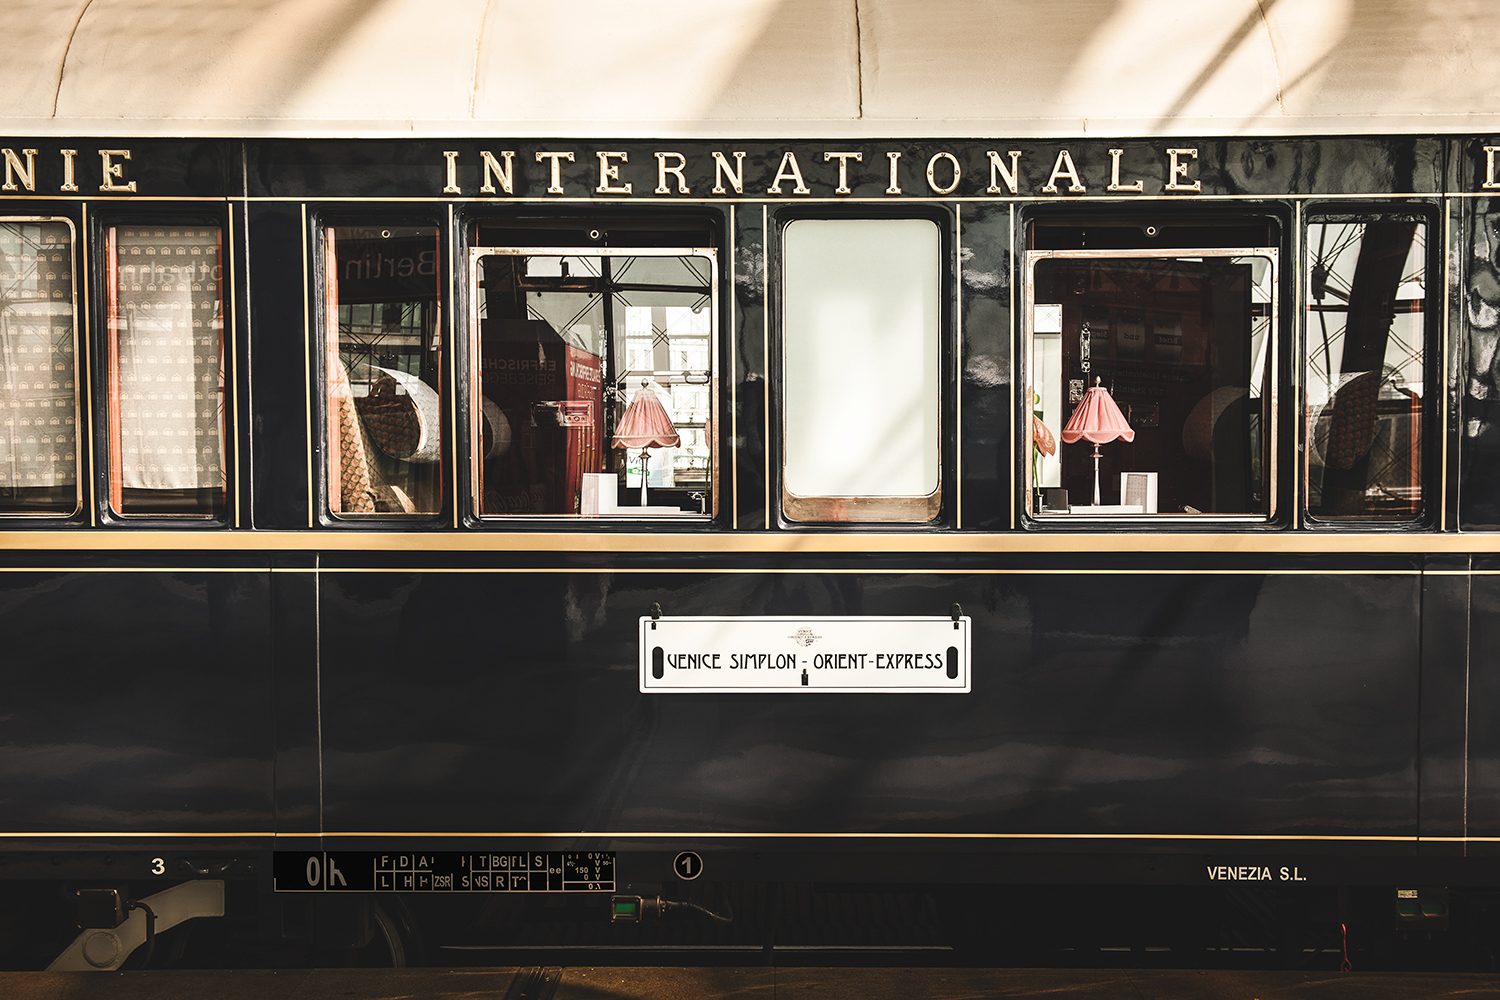 The exterior of the Venice Simplon-Orient-Express train